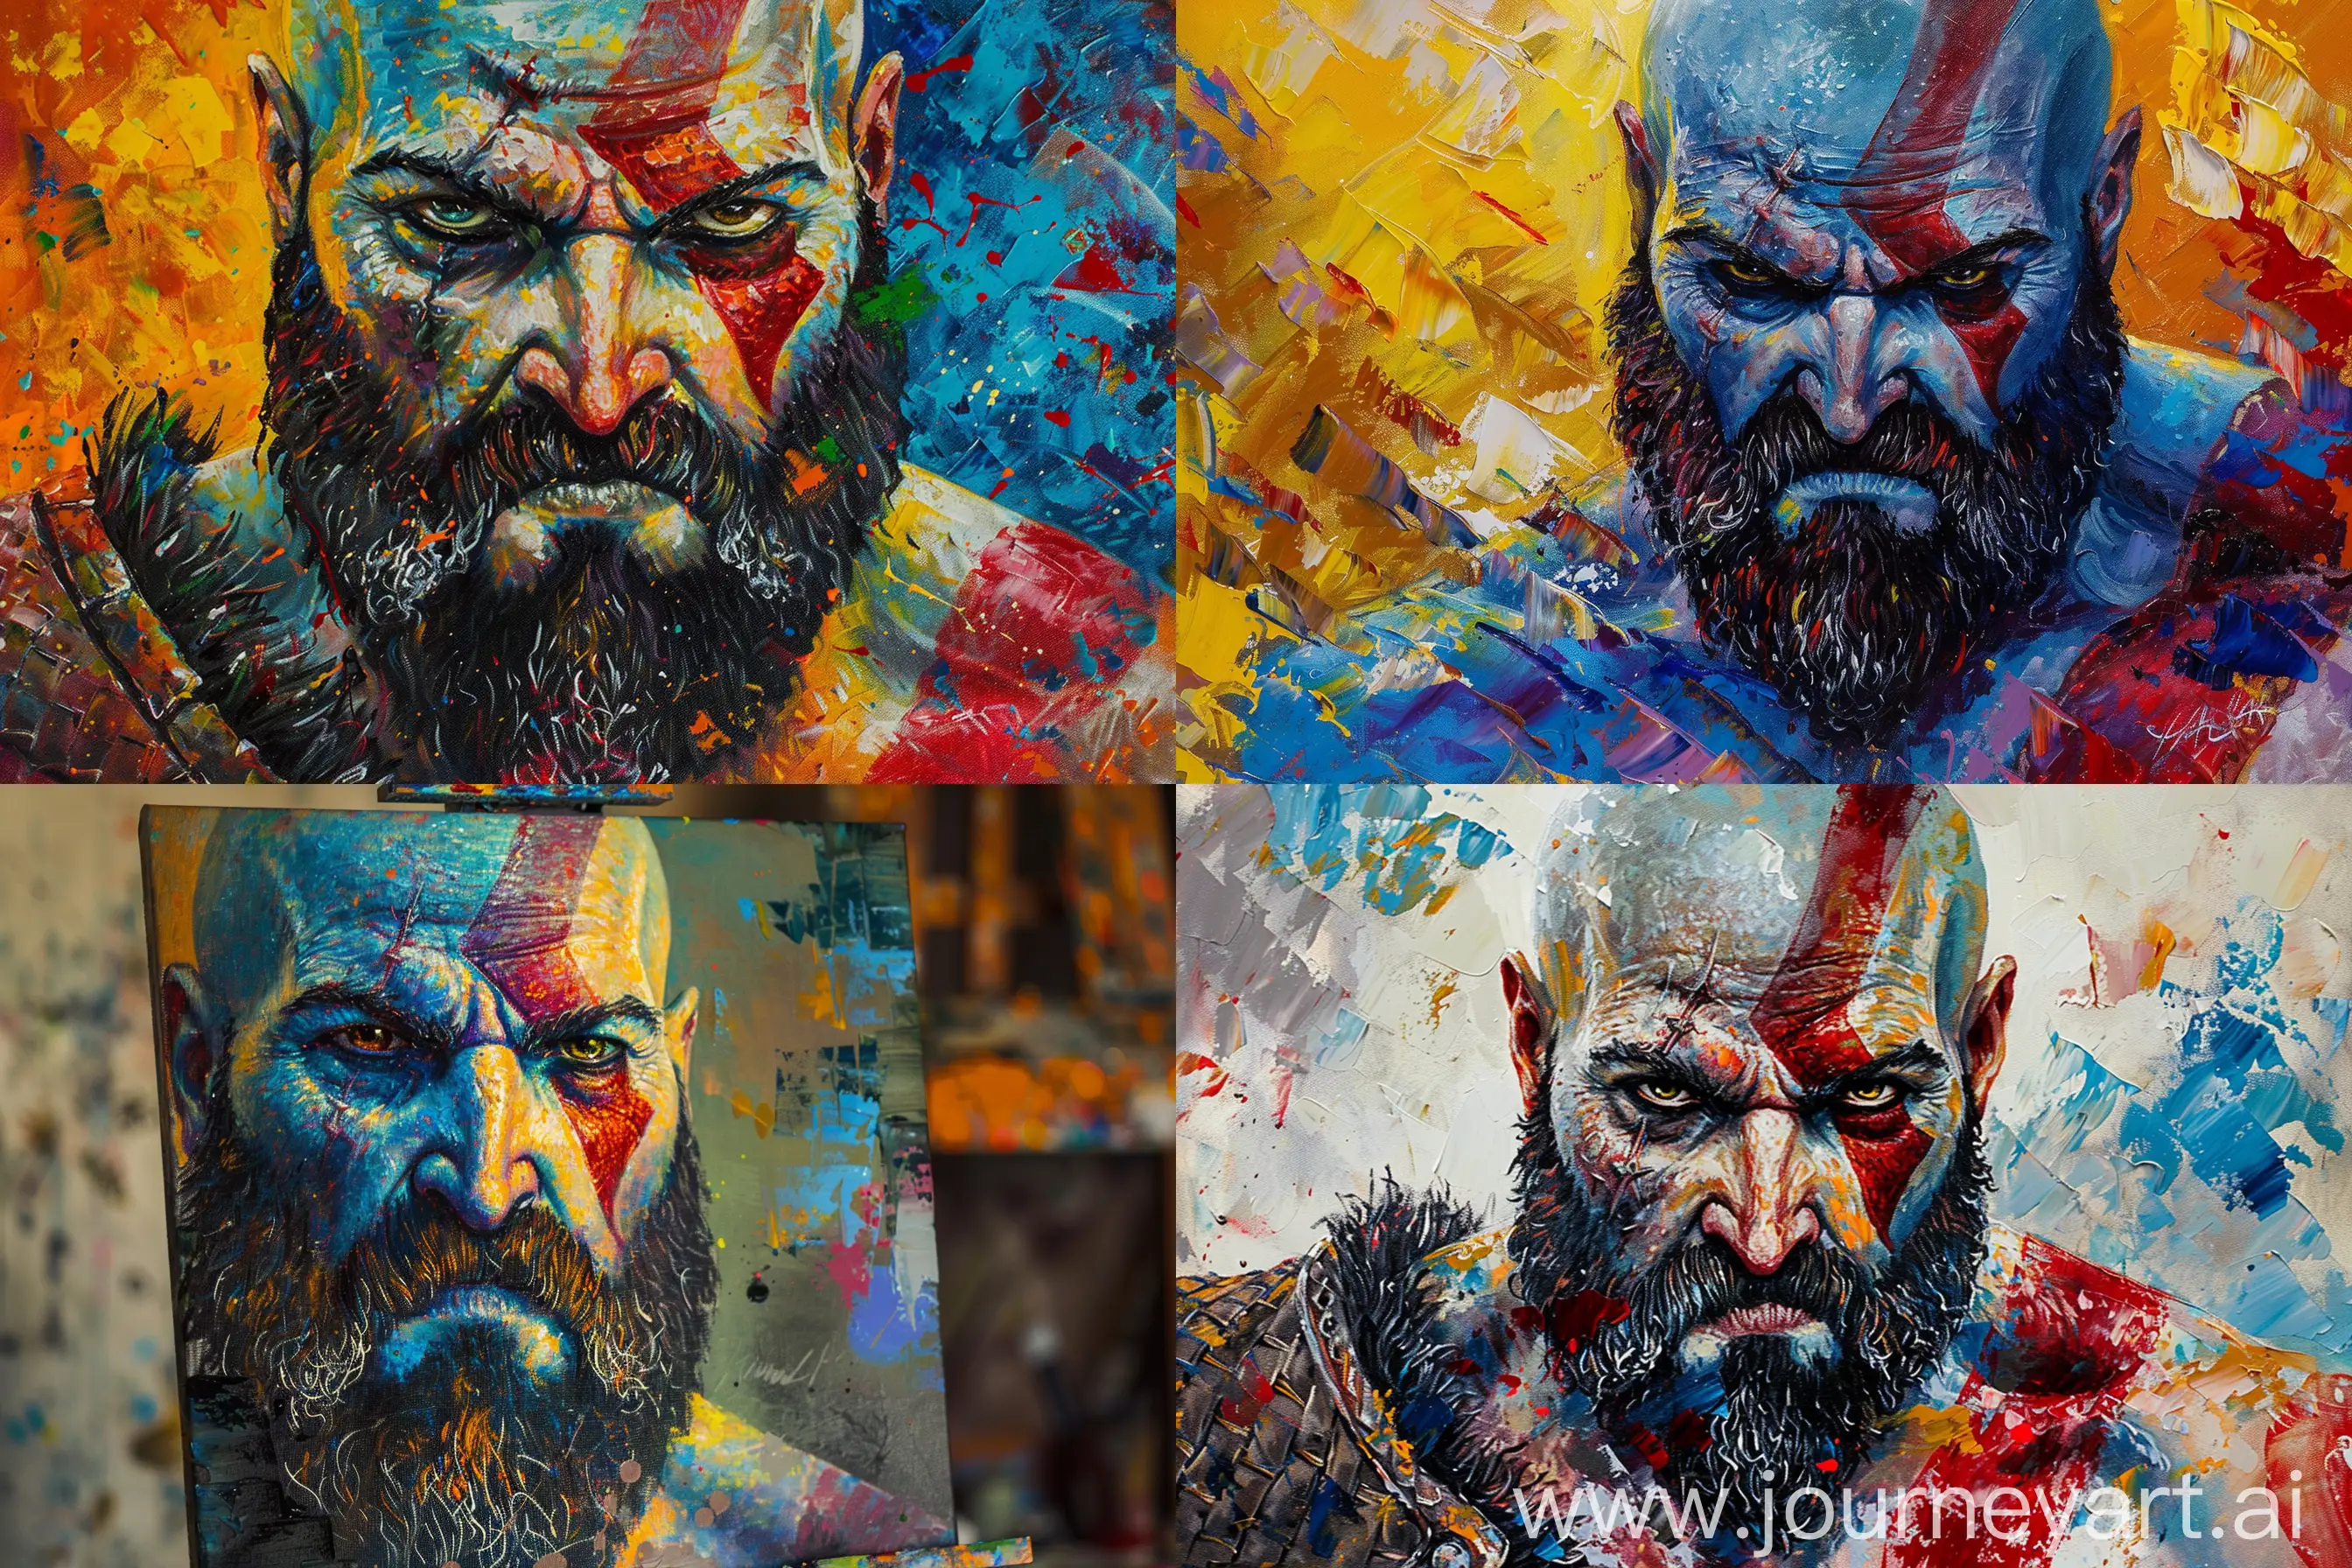 Vibrant-Van-Gogh-Style-Oil-Painting-of-Kratos-from-God-of-War